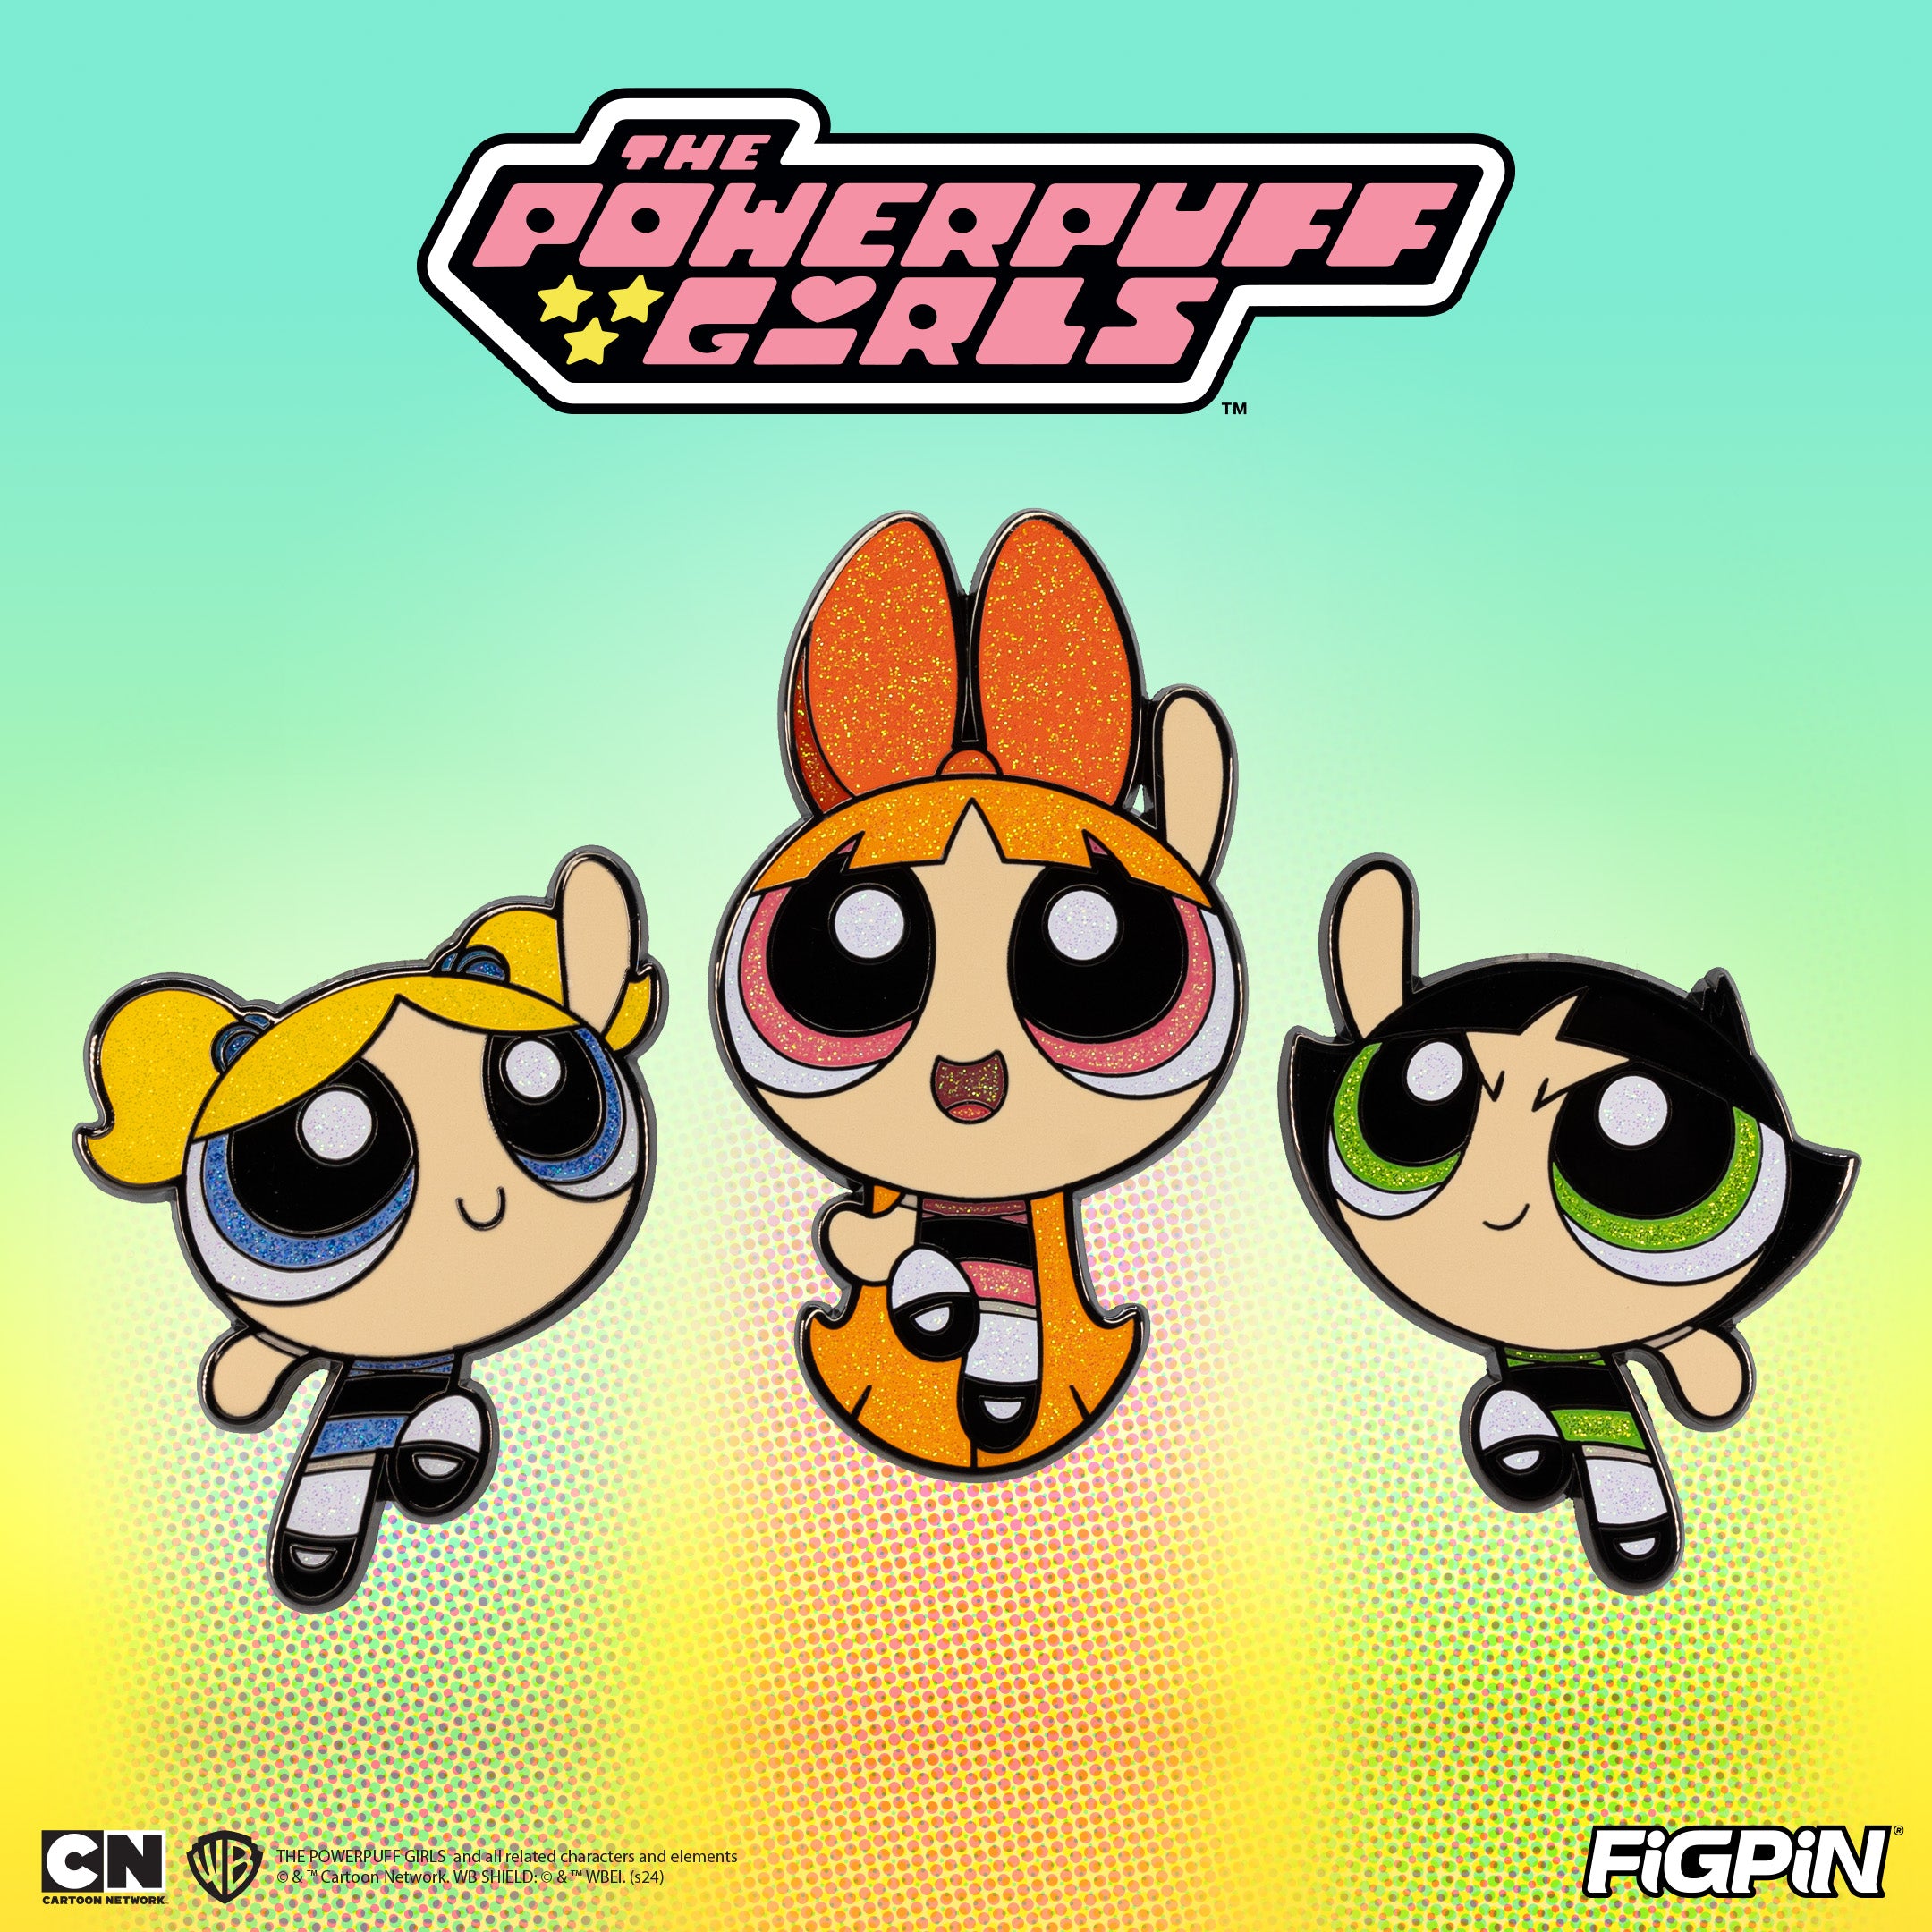 Photograph of The Powerpuff Girls characters available as enamel pins in the 3-piece Box Set